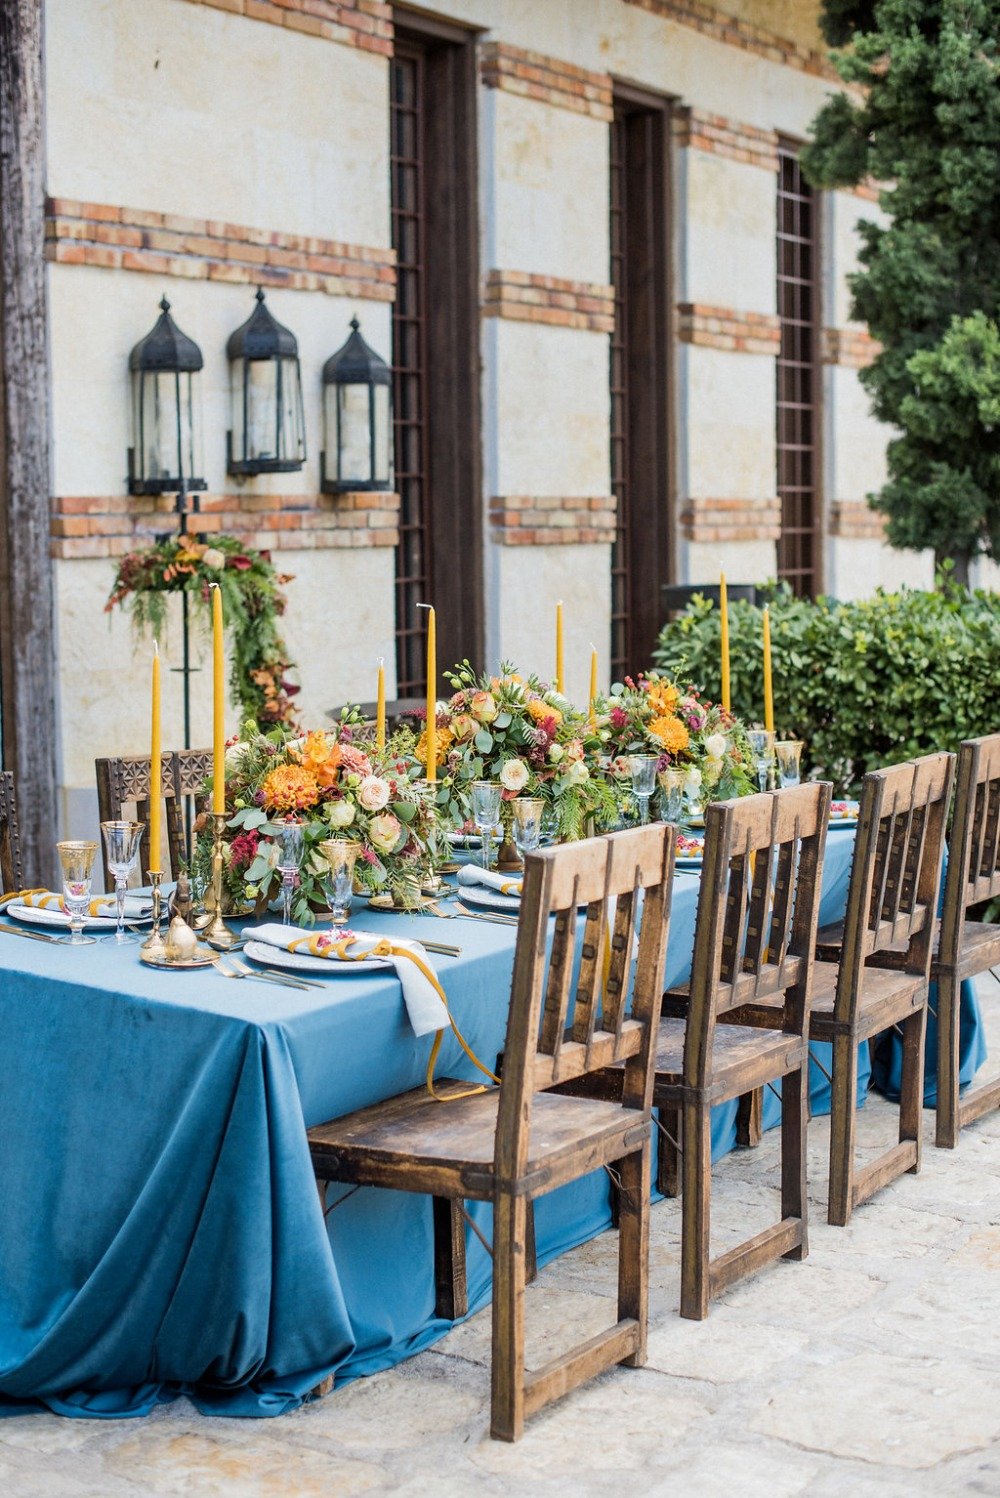 ancient royalty inspired wedding table